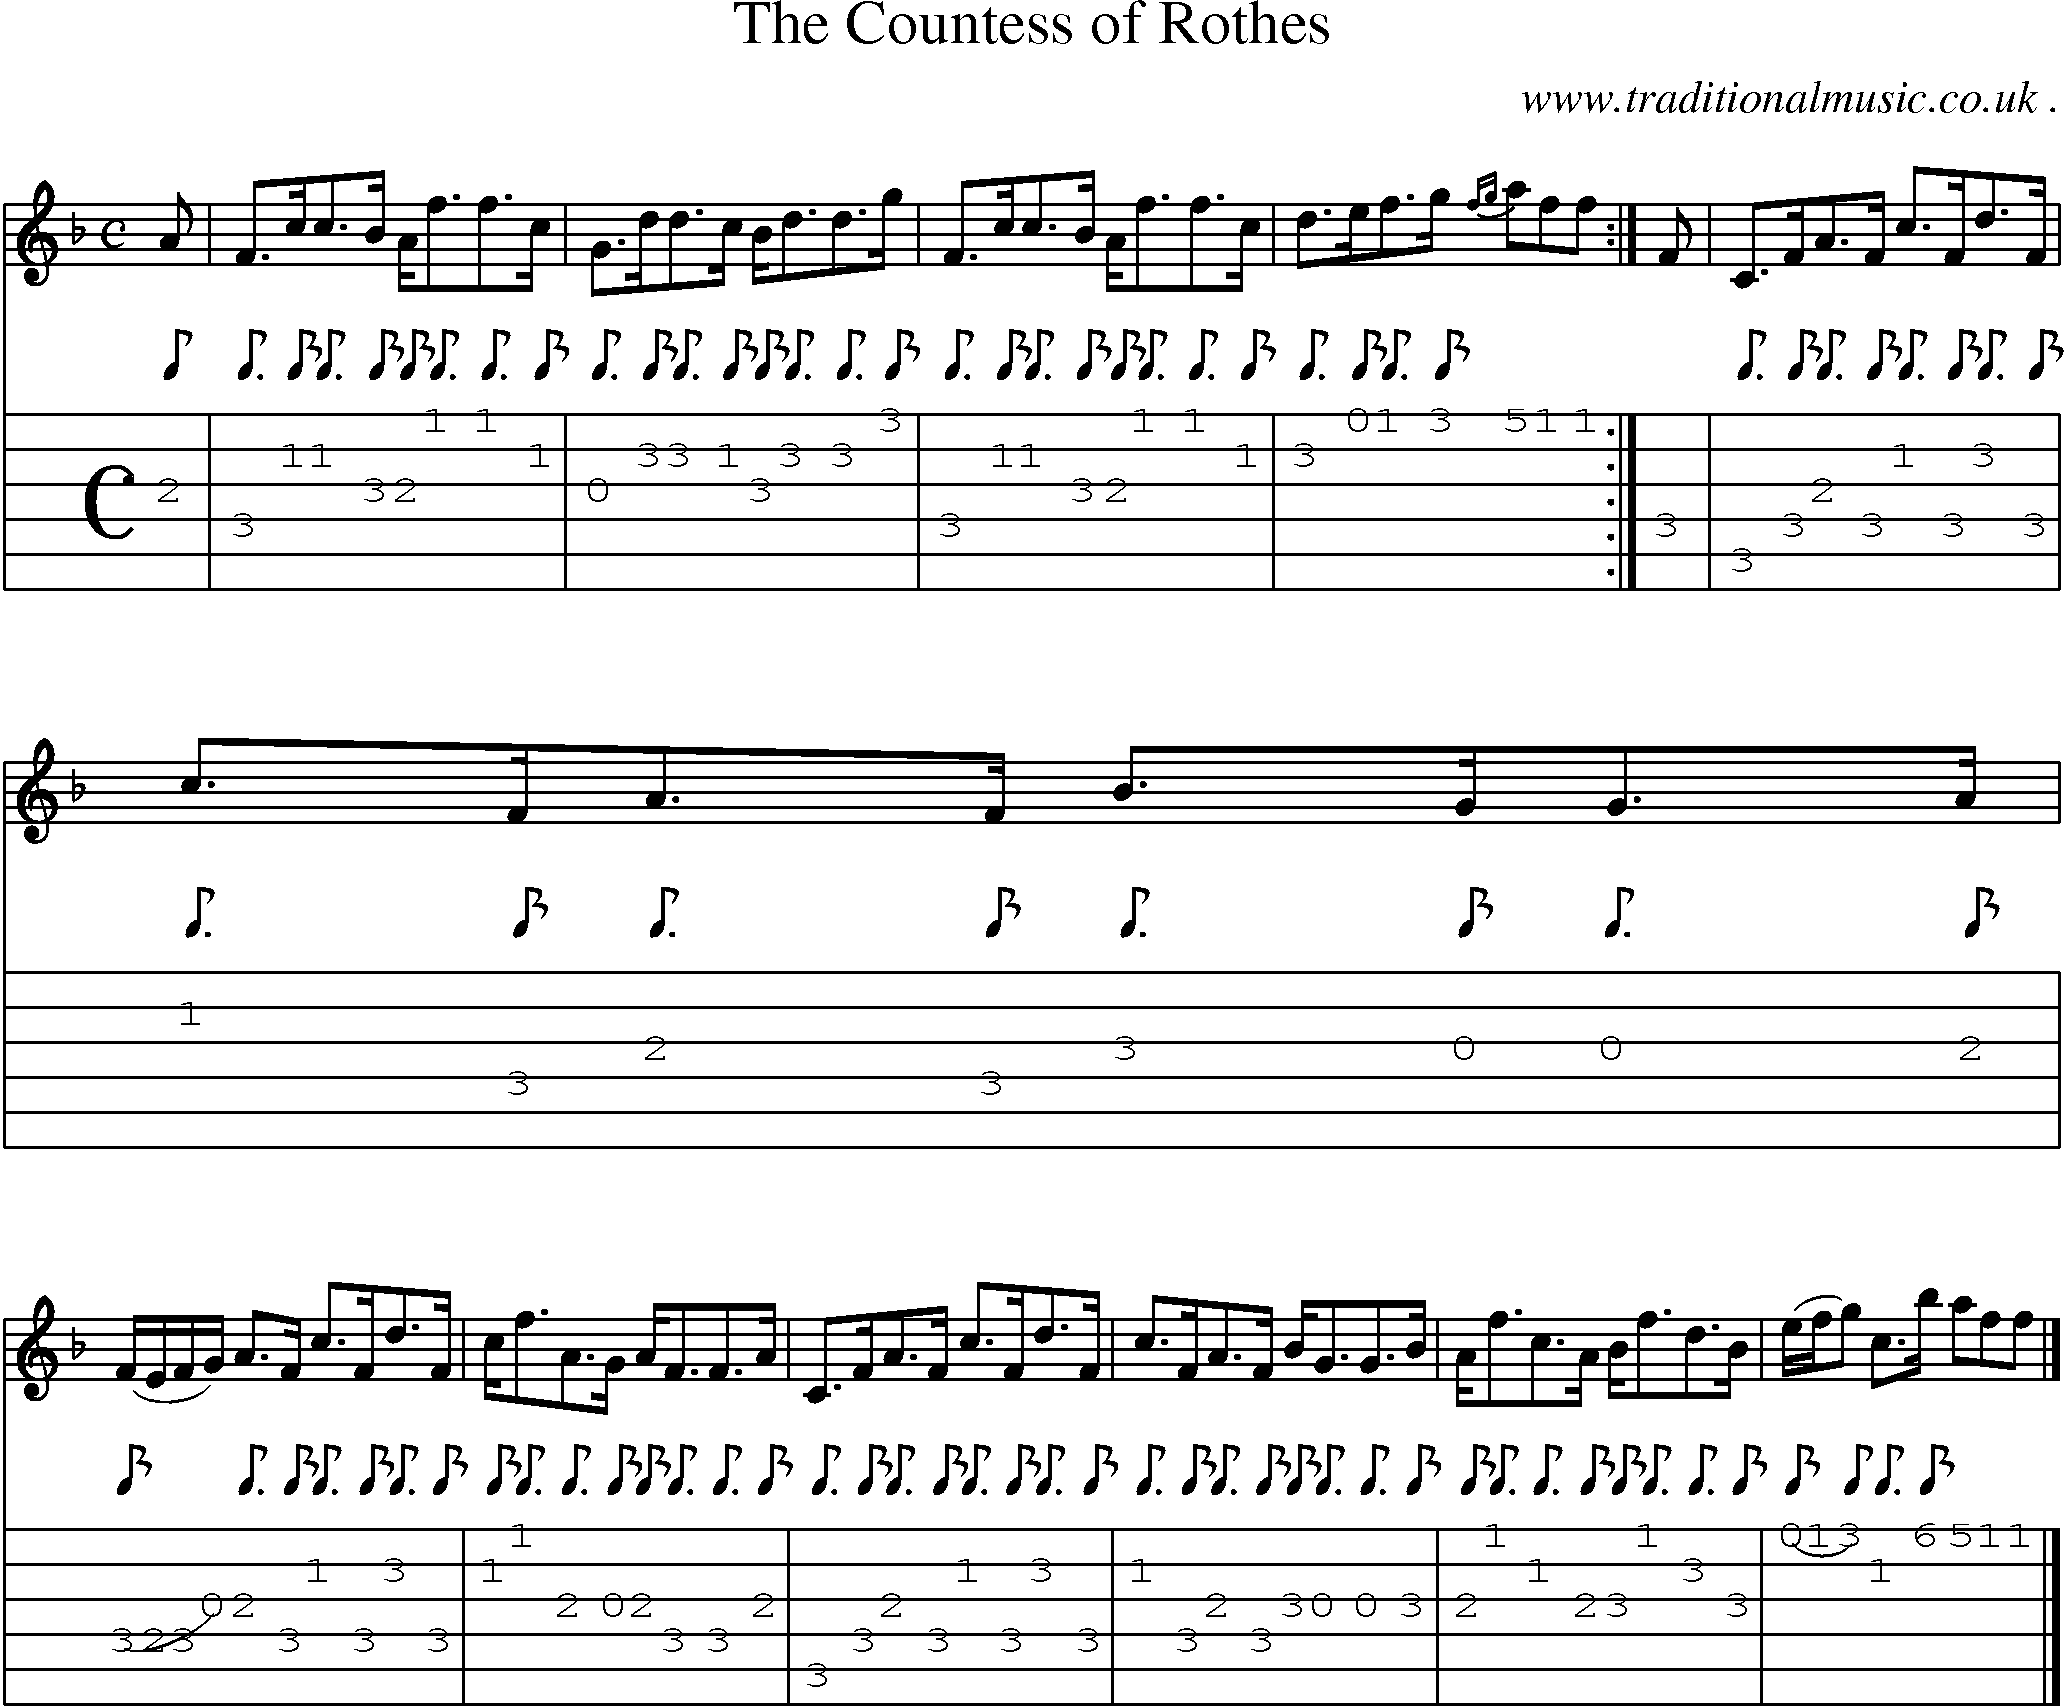 Sheet-music  score, Chords and Guitar Tabs for The Countess Of Rothes